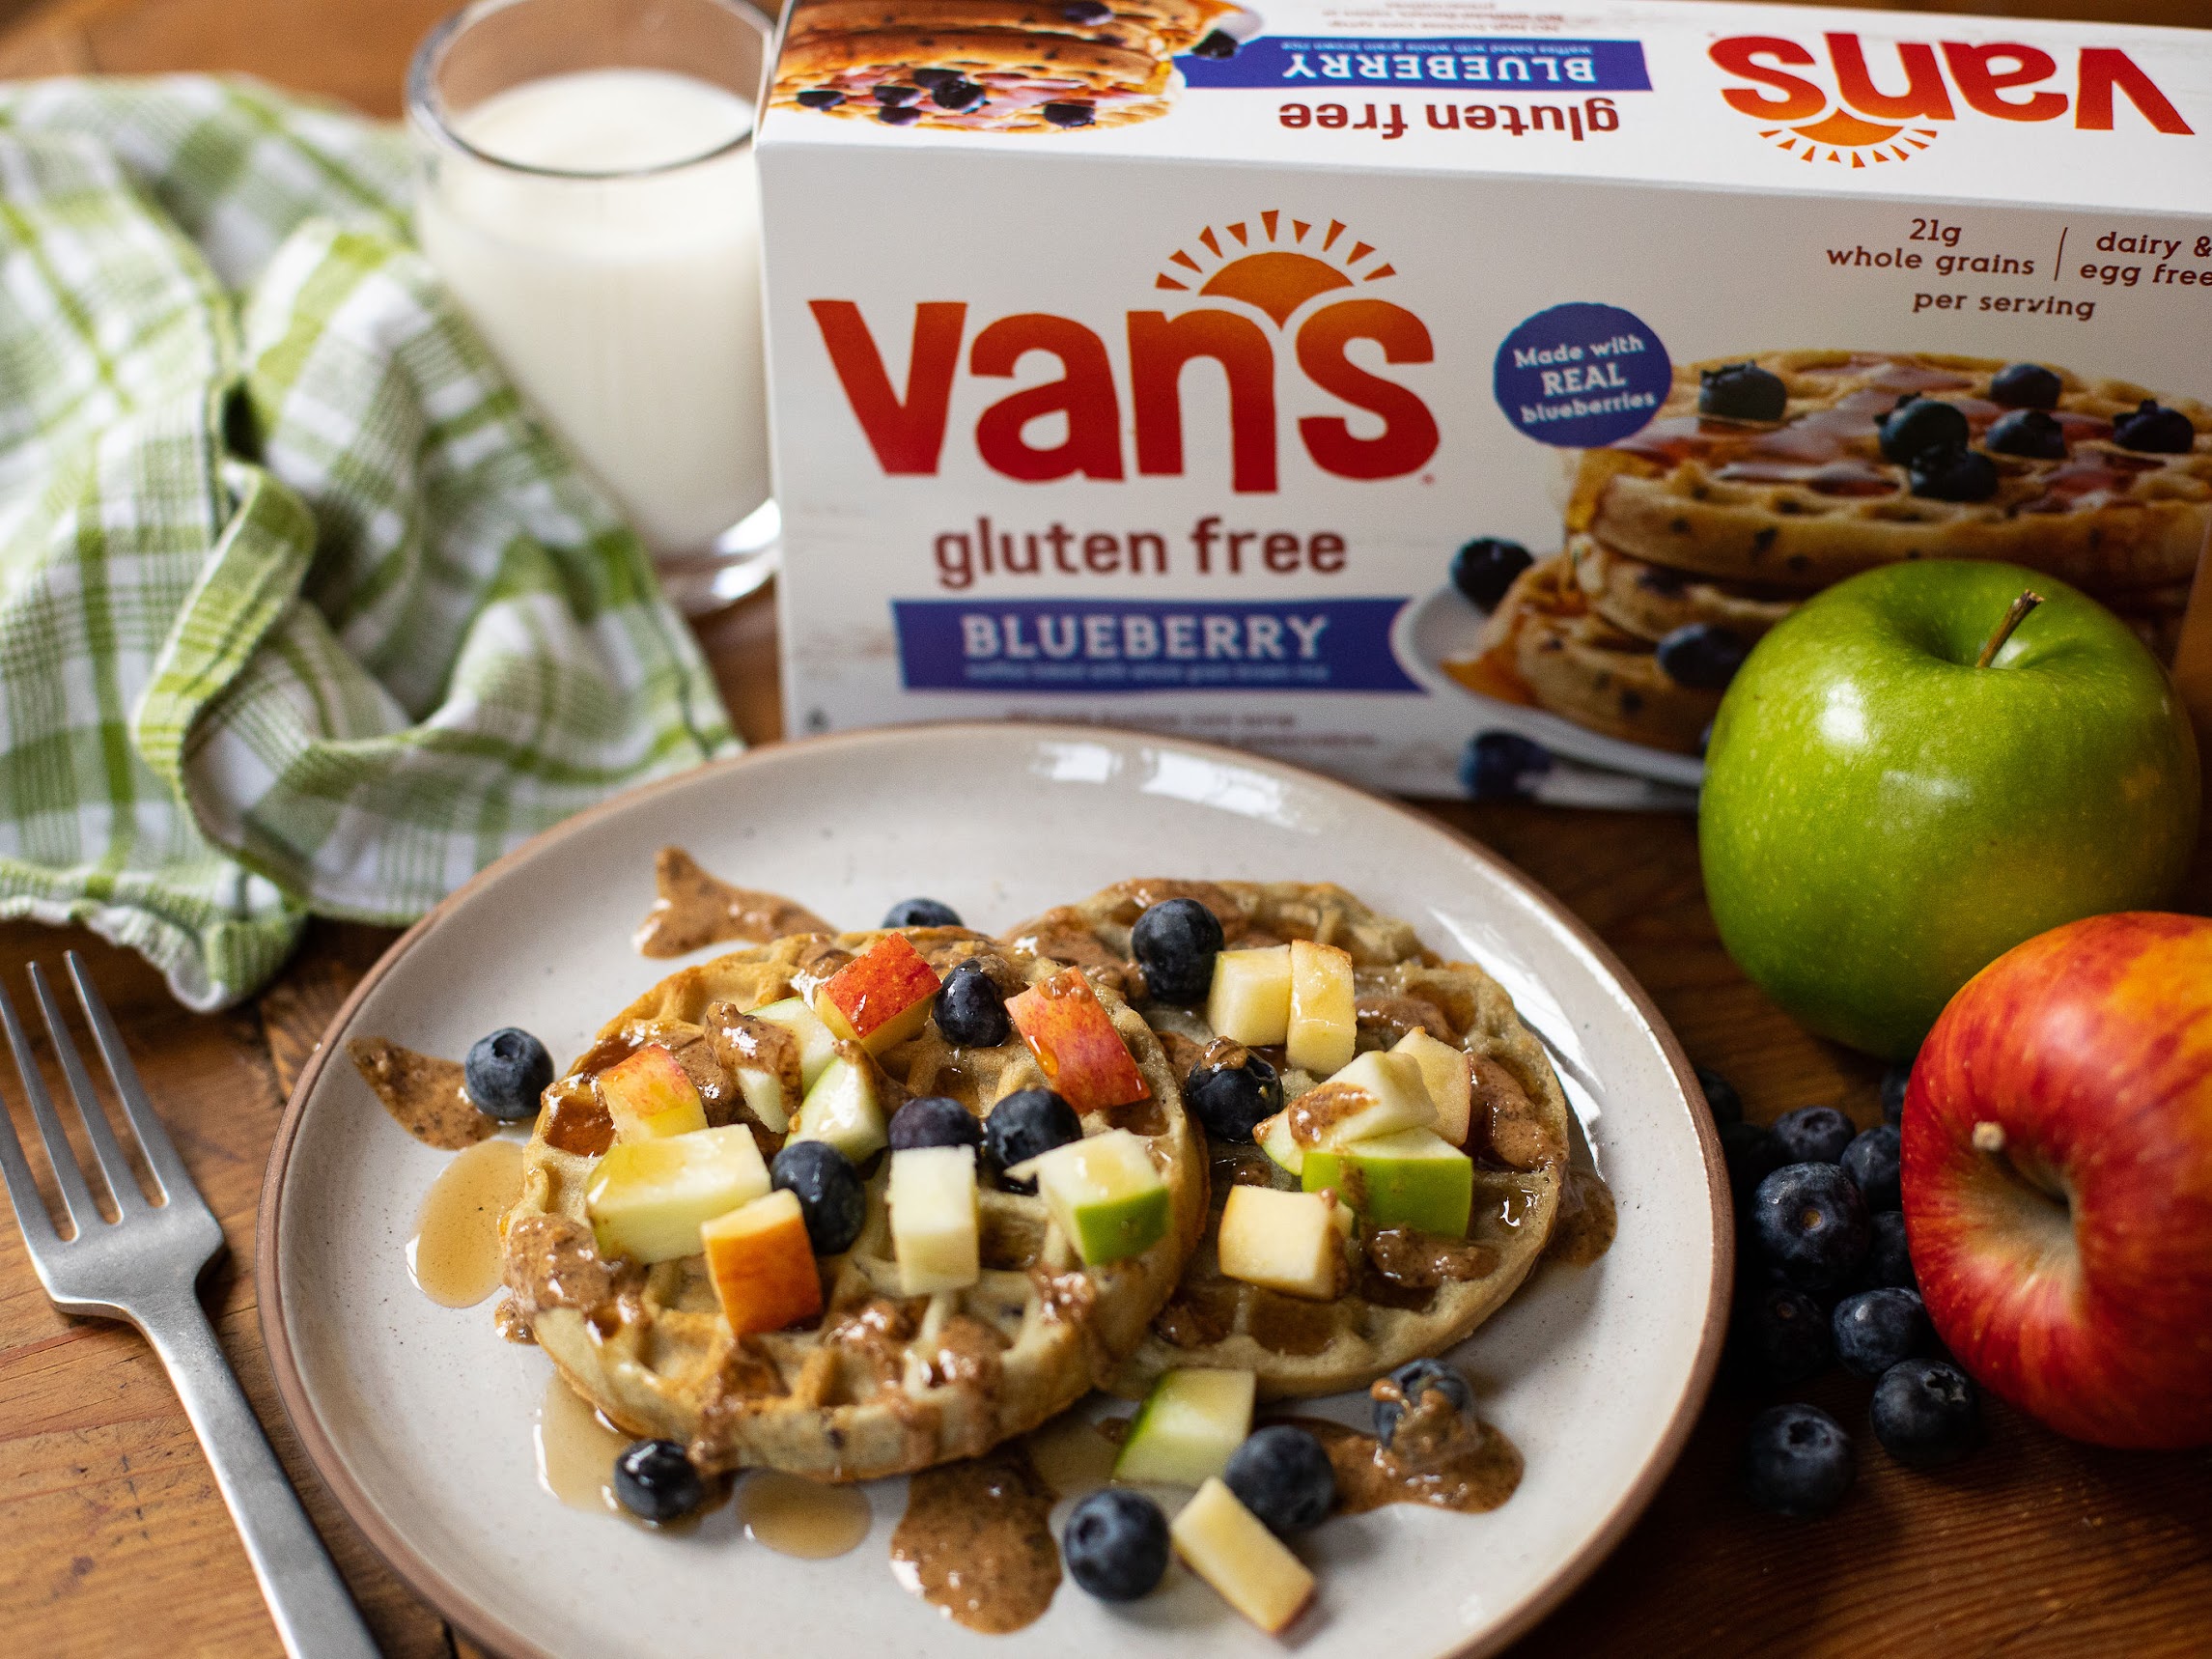 Celebrate Gluten Freedom With The Great Taste Of Van's Waffles & Save NOW At Publix on I Heart Publix